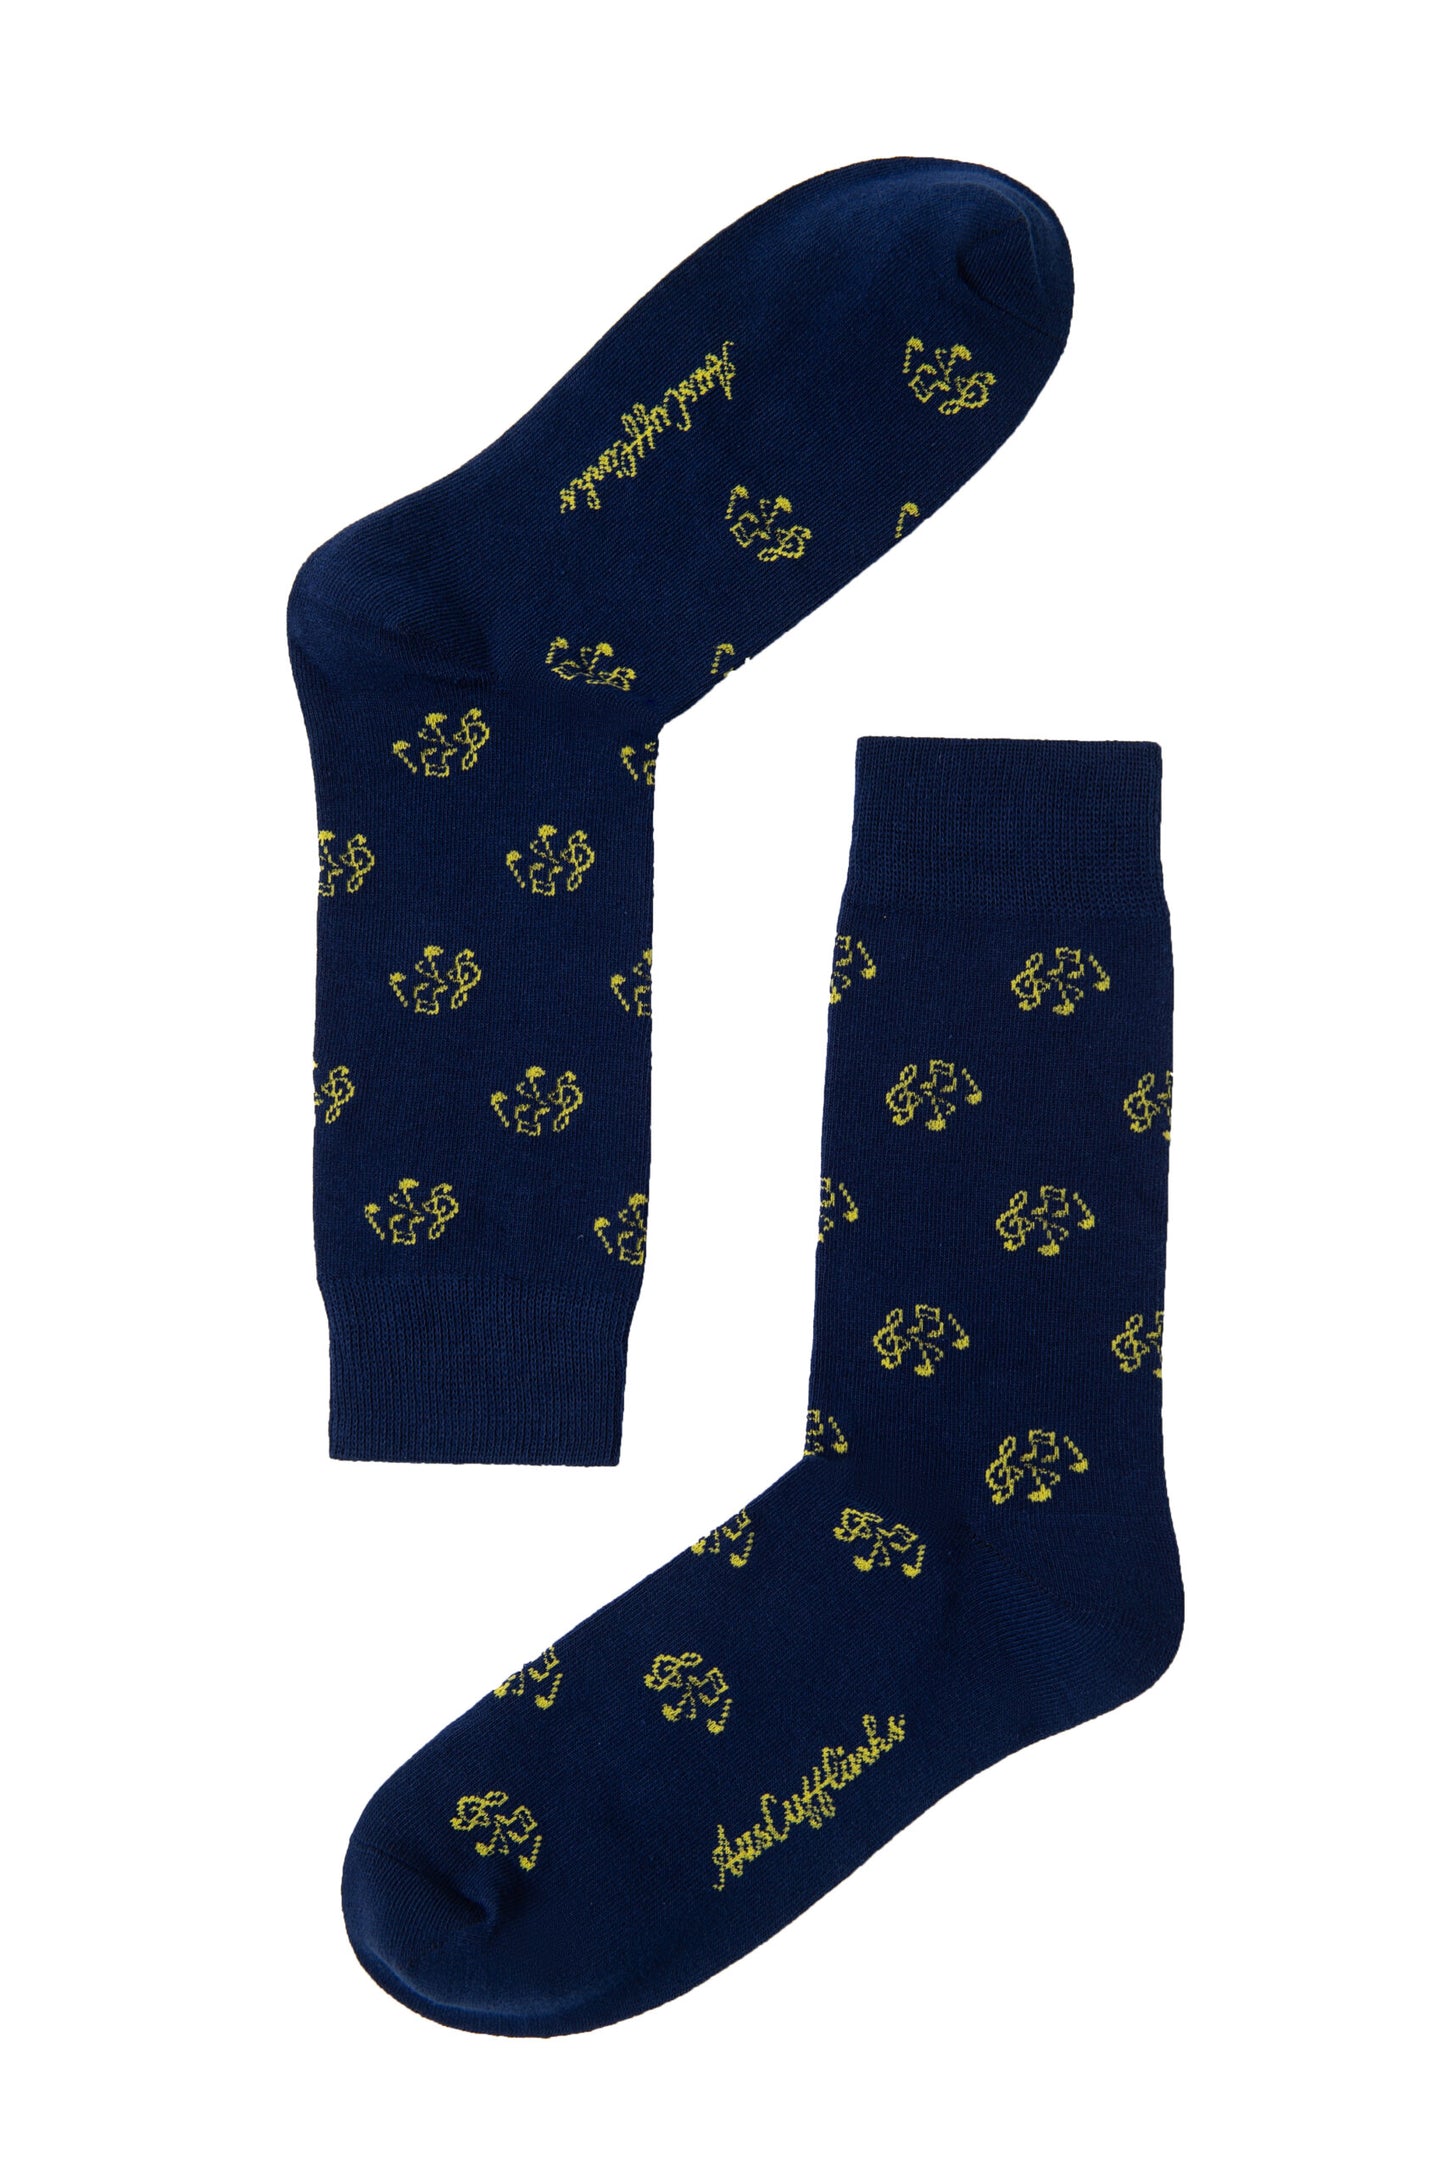 A pair of Musical Note socks with yellow motorcycle patterns and text detail displayed on a white background, designed to harmonize with your feet.